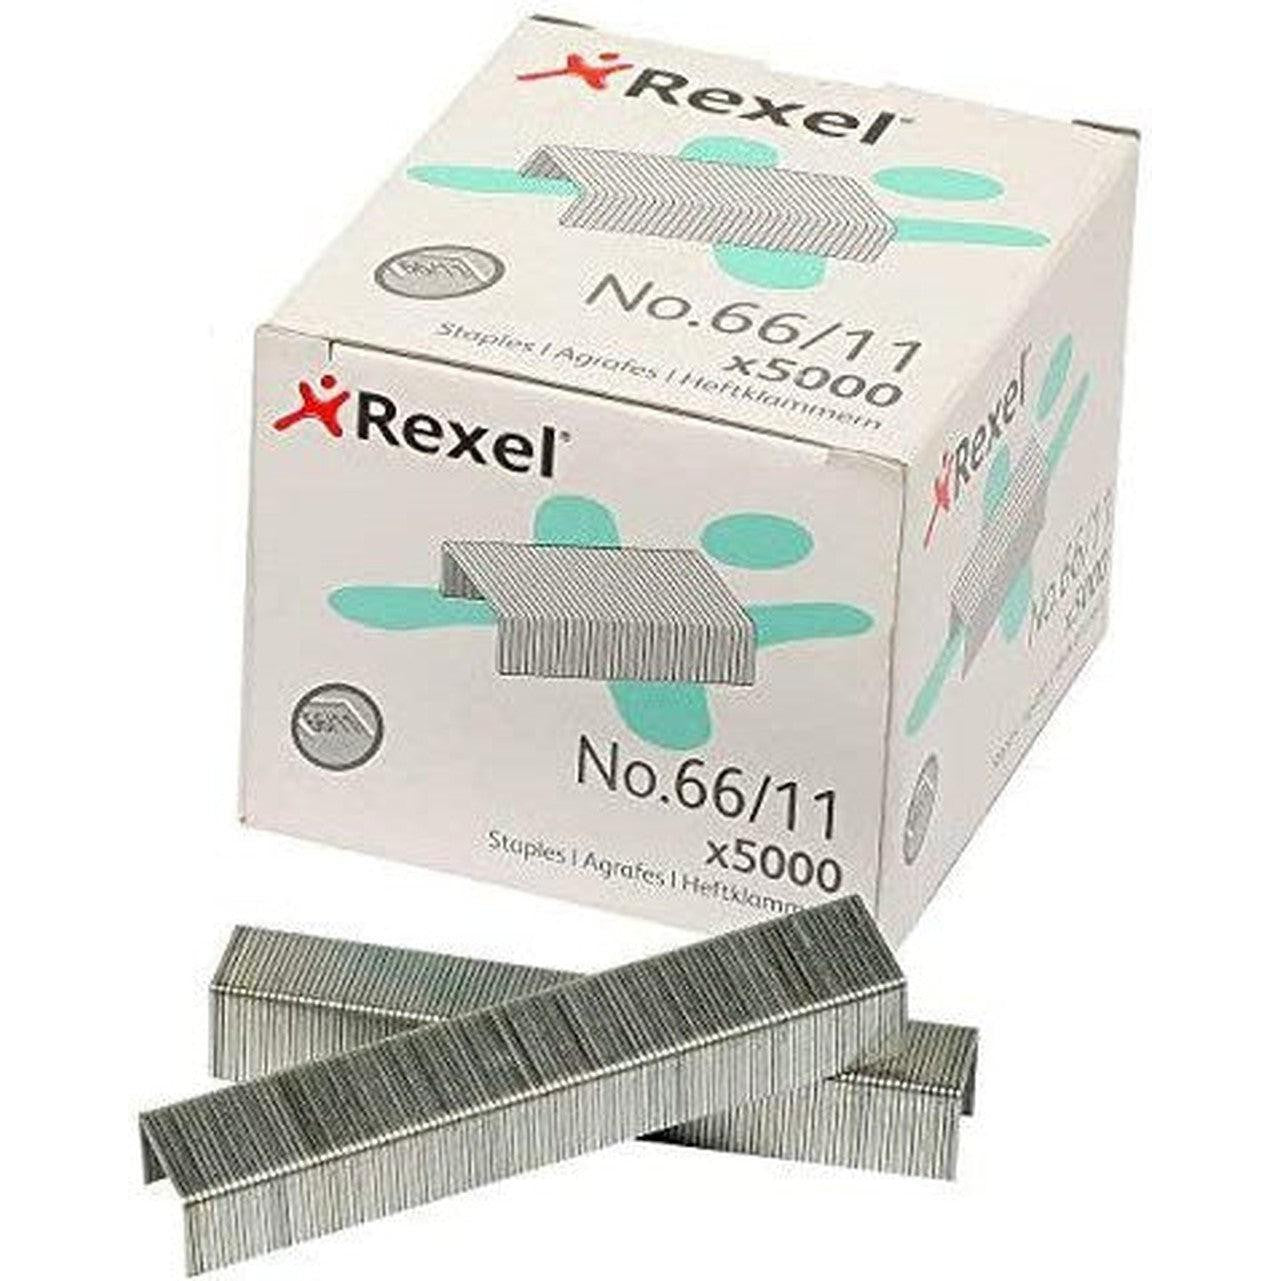 Rexel No.66/11 Mm Heavy Duty Staples-Stationery Staplers And Staples-Rexel-Star Light Kuwait